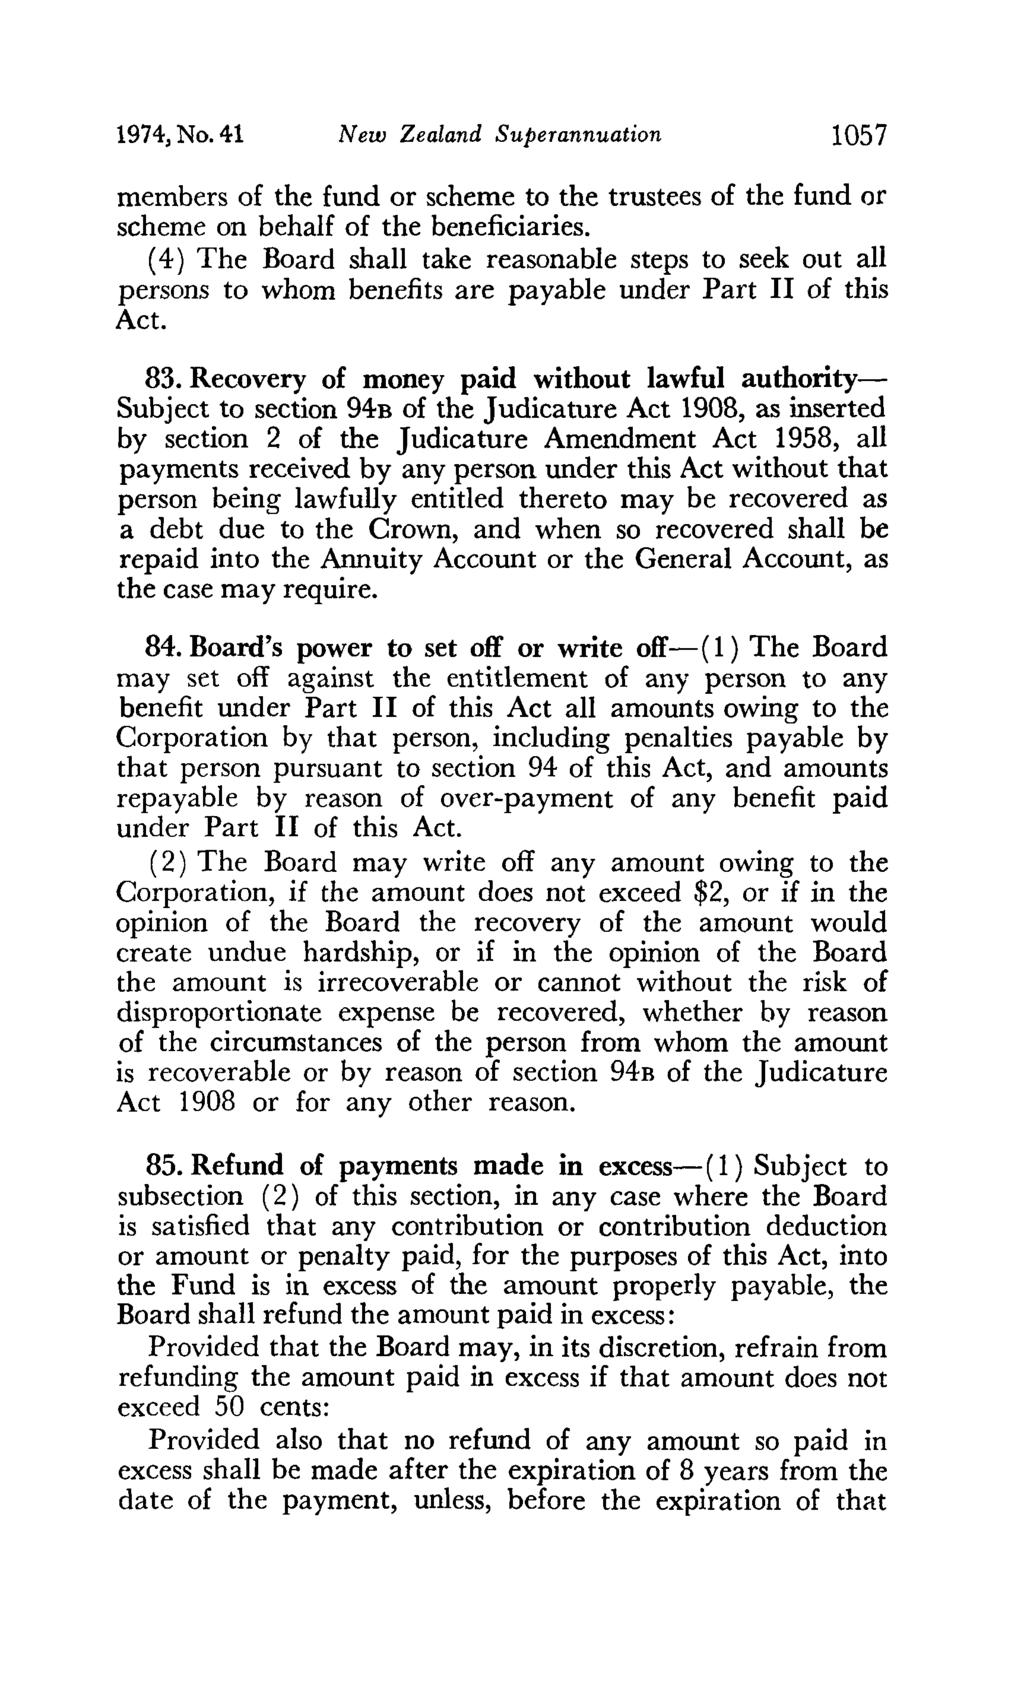 1974, No. 41 New Zealand Superannuation 1057 members of the fund or scheme to the trustees of the fund or scheme on behalf of the beneficiaries.